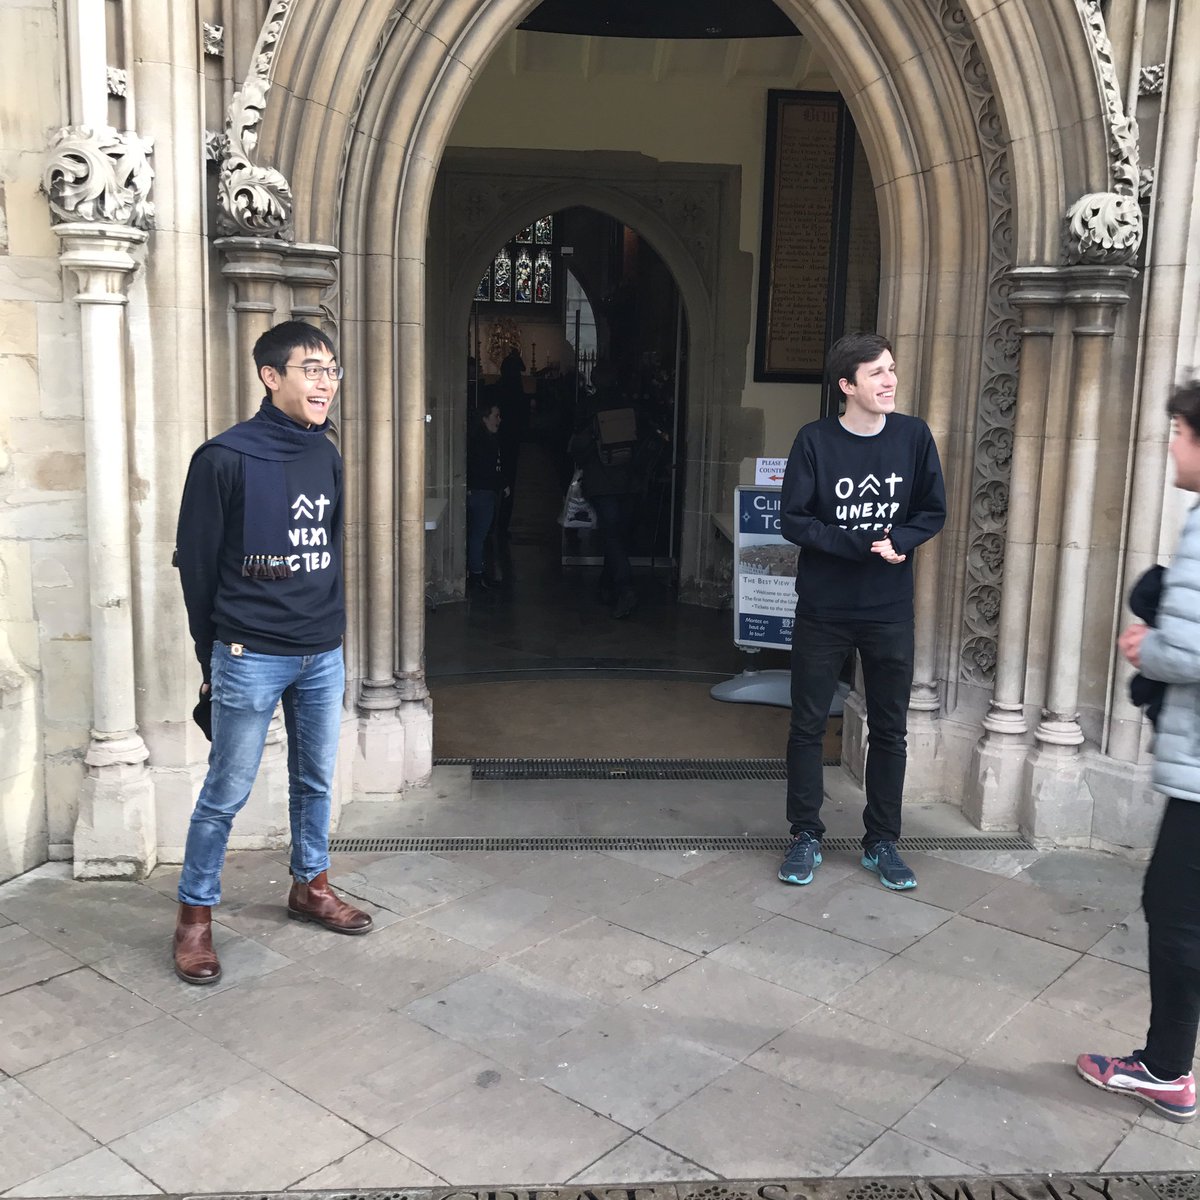 Cambridge Cu On Twitter Another Great Lunchtime From Peterdray Thinking About The Unexpected Hope That Following Jesus Offers Unexpectedcambridge Https T Co Wqjyvur9ar